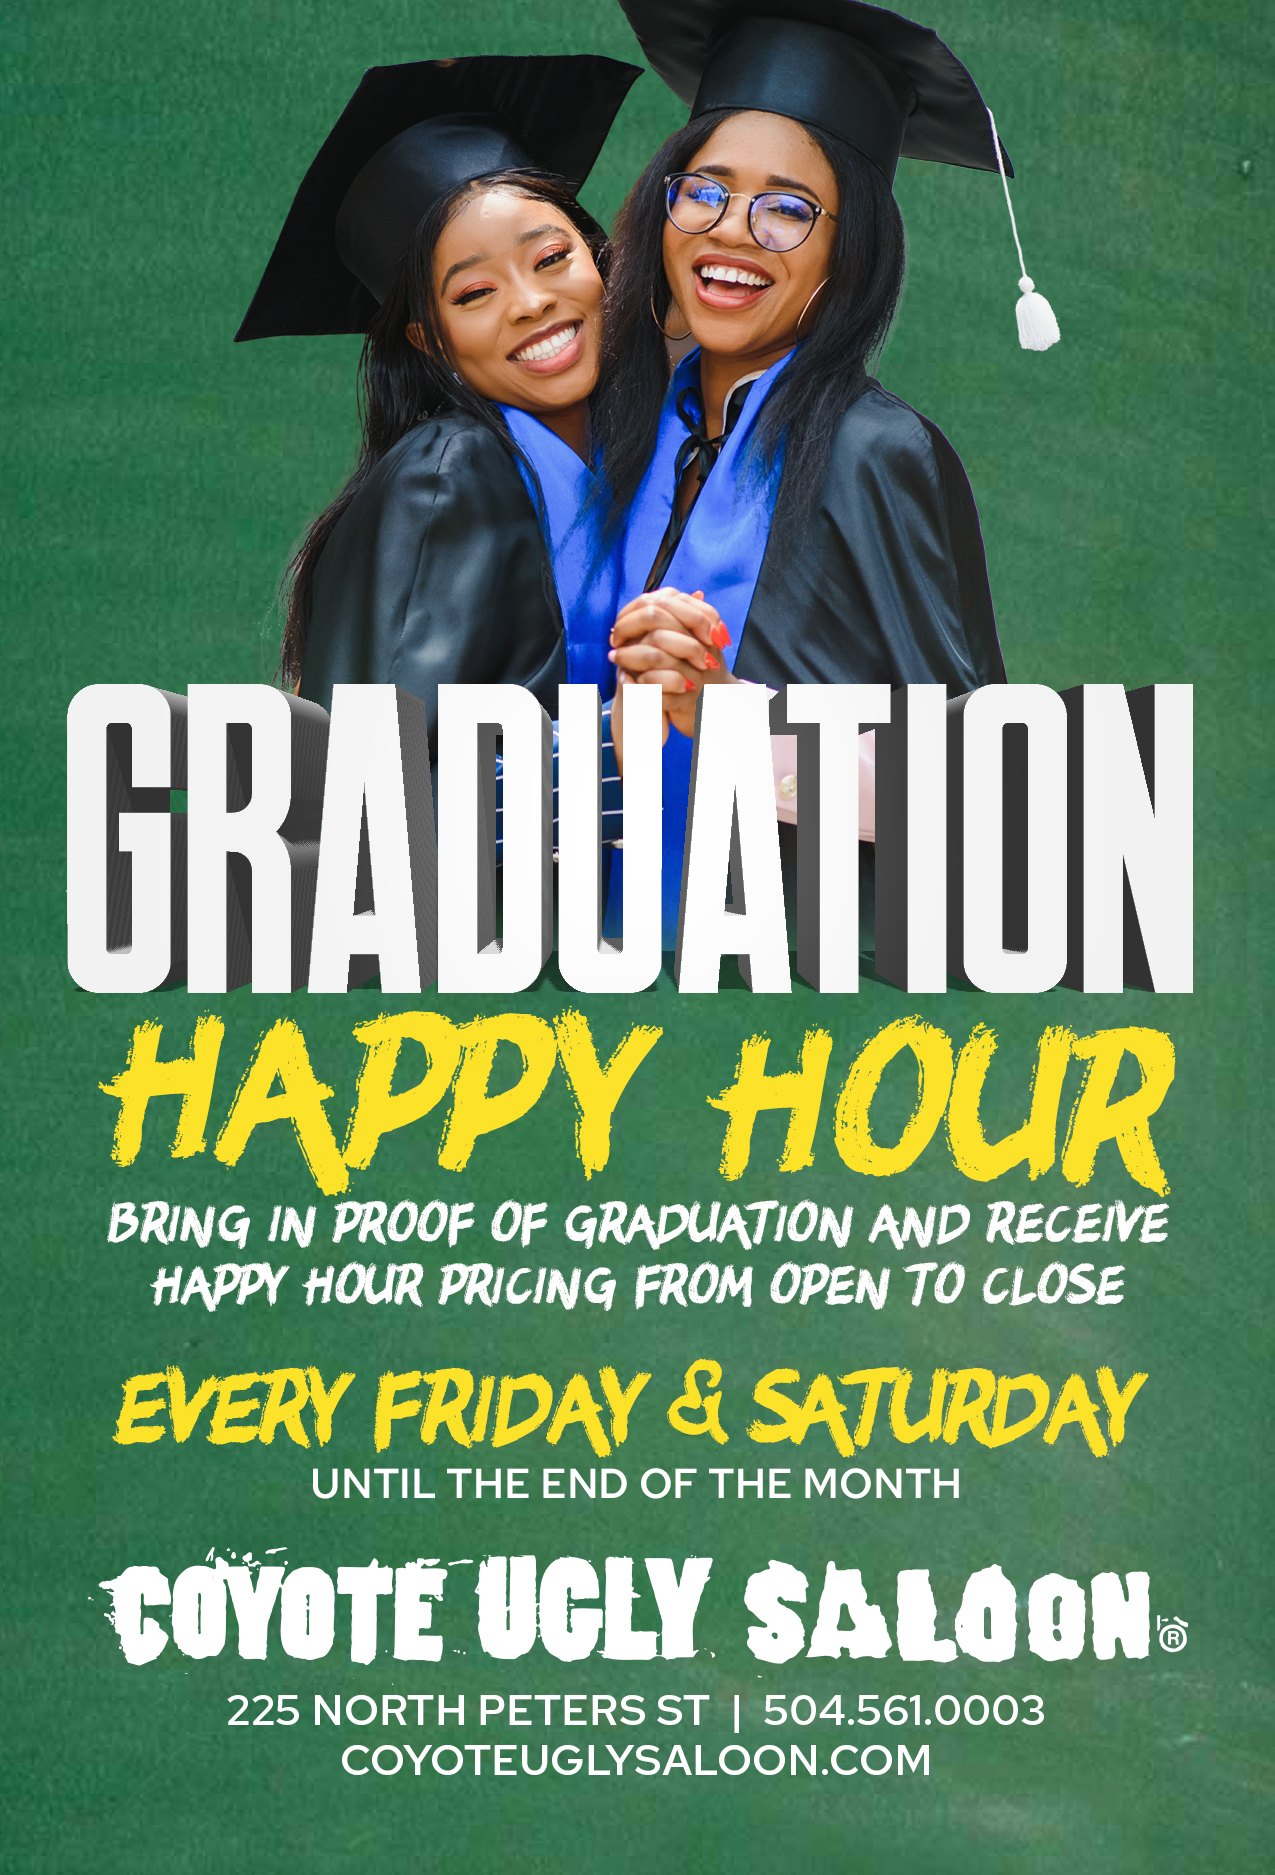 Graduation Happy Hour in New Orleans on May 27, 2022